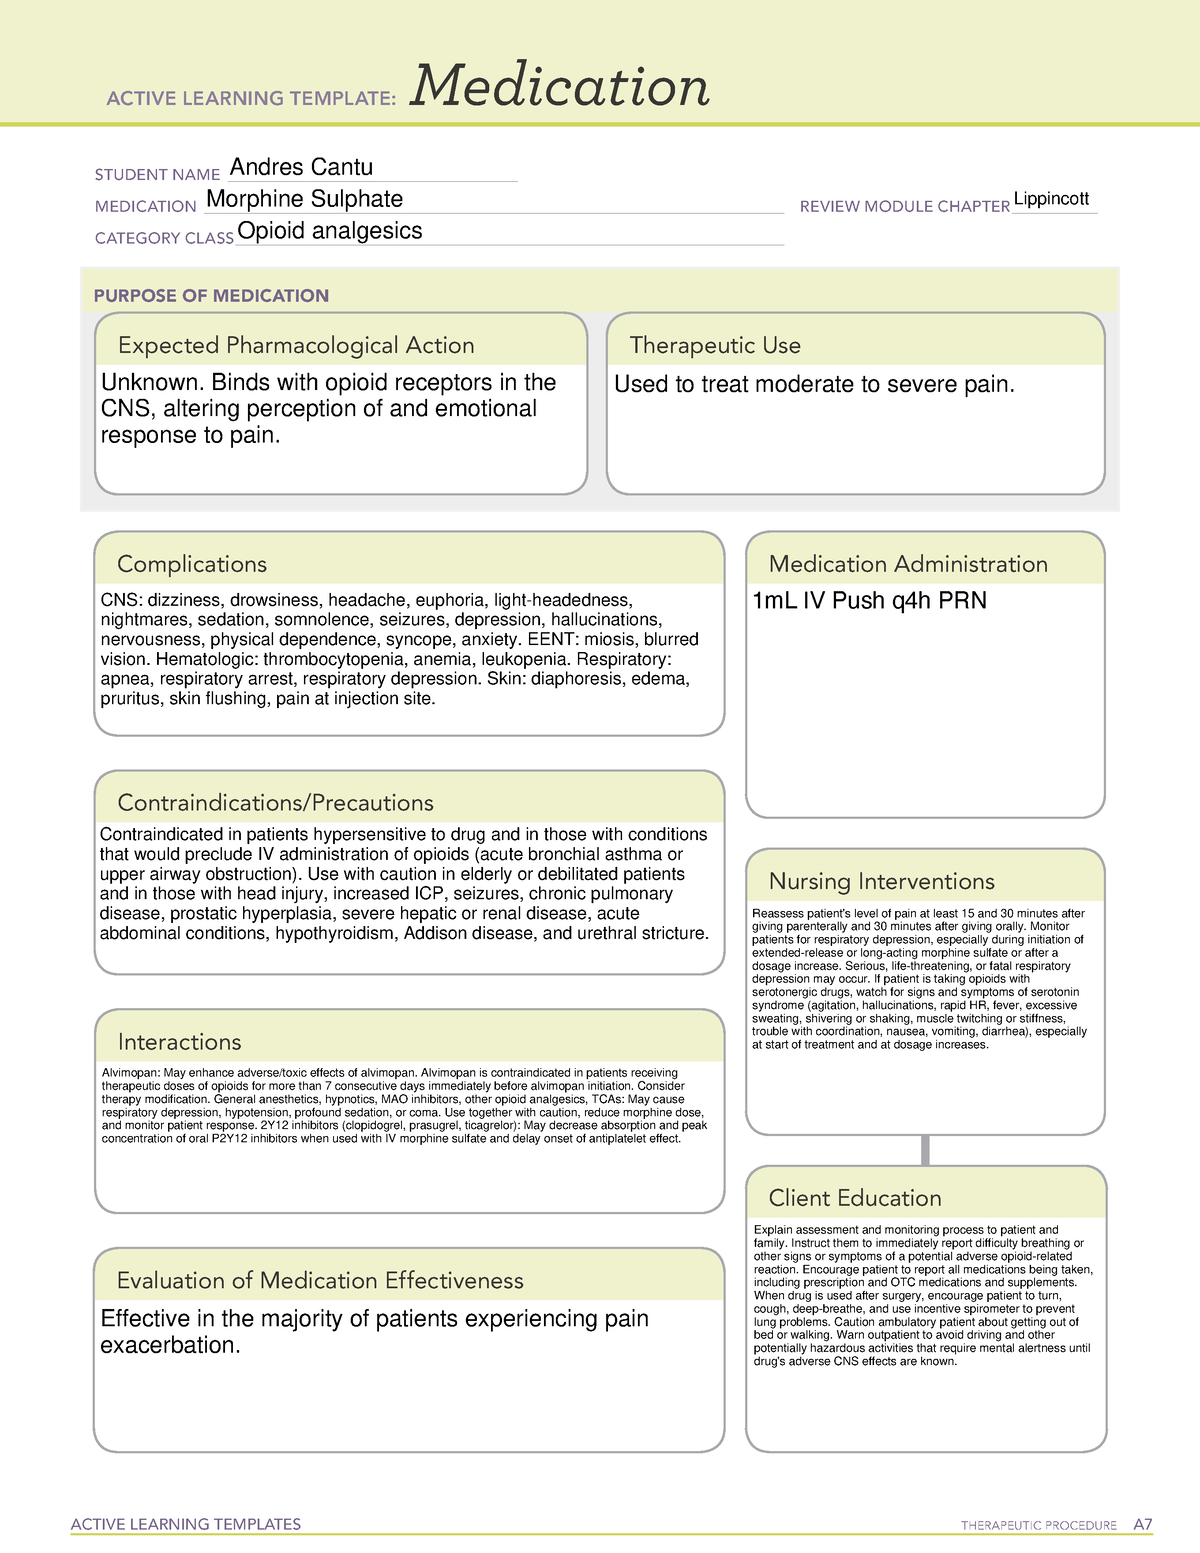 ATI Medication Morphine Sulfate ACTIVE LEARNING TEMPLATES THERAPEUTIC